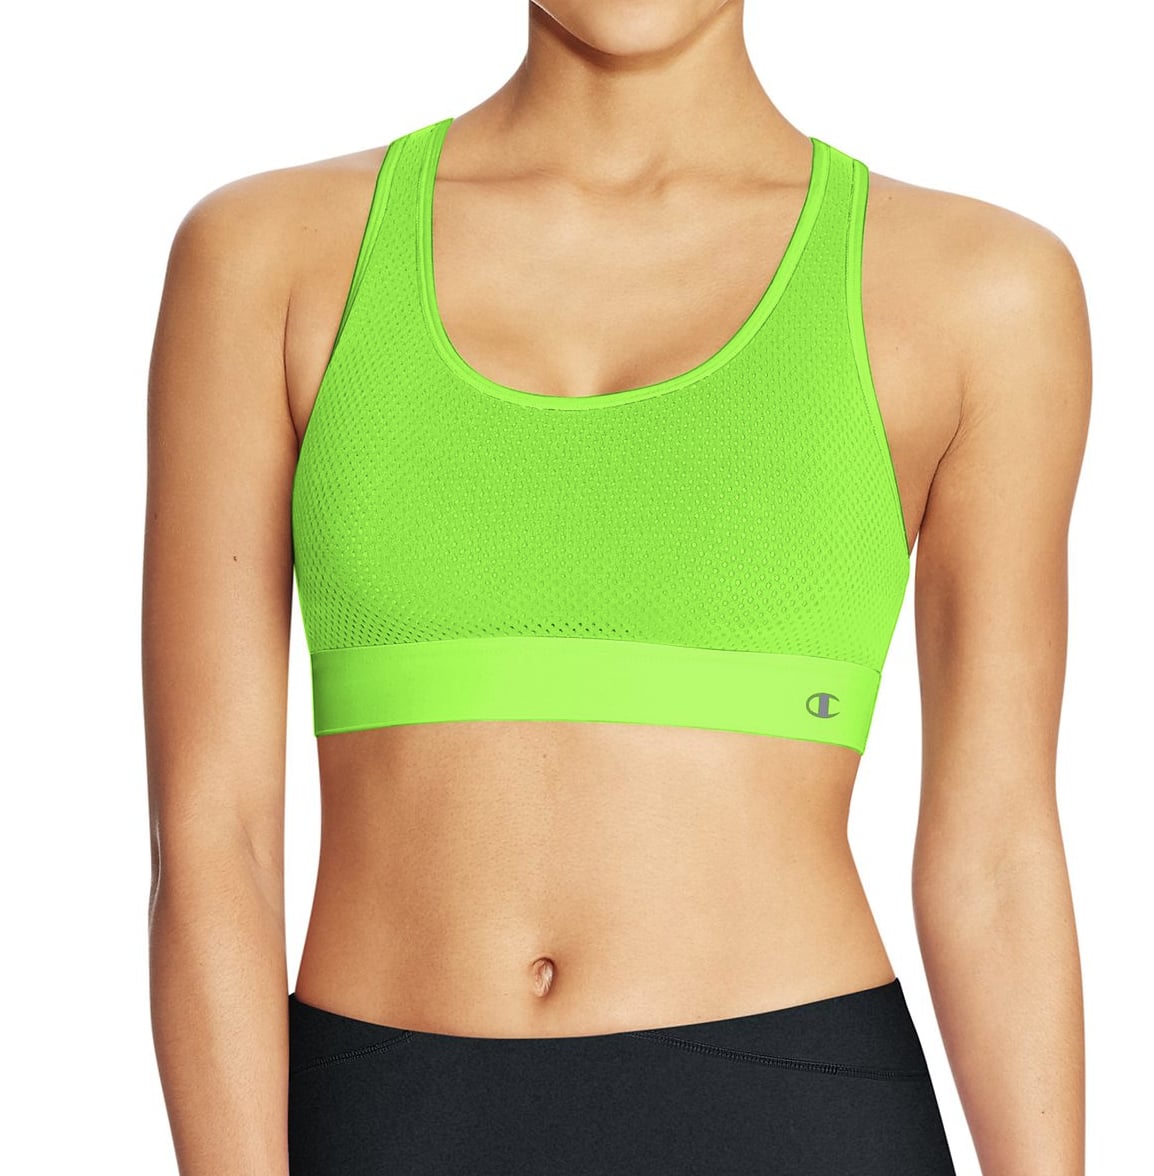 neon workout outfit